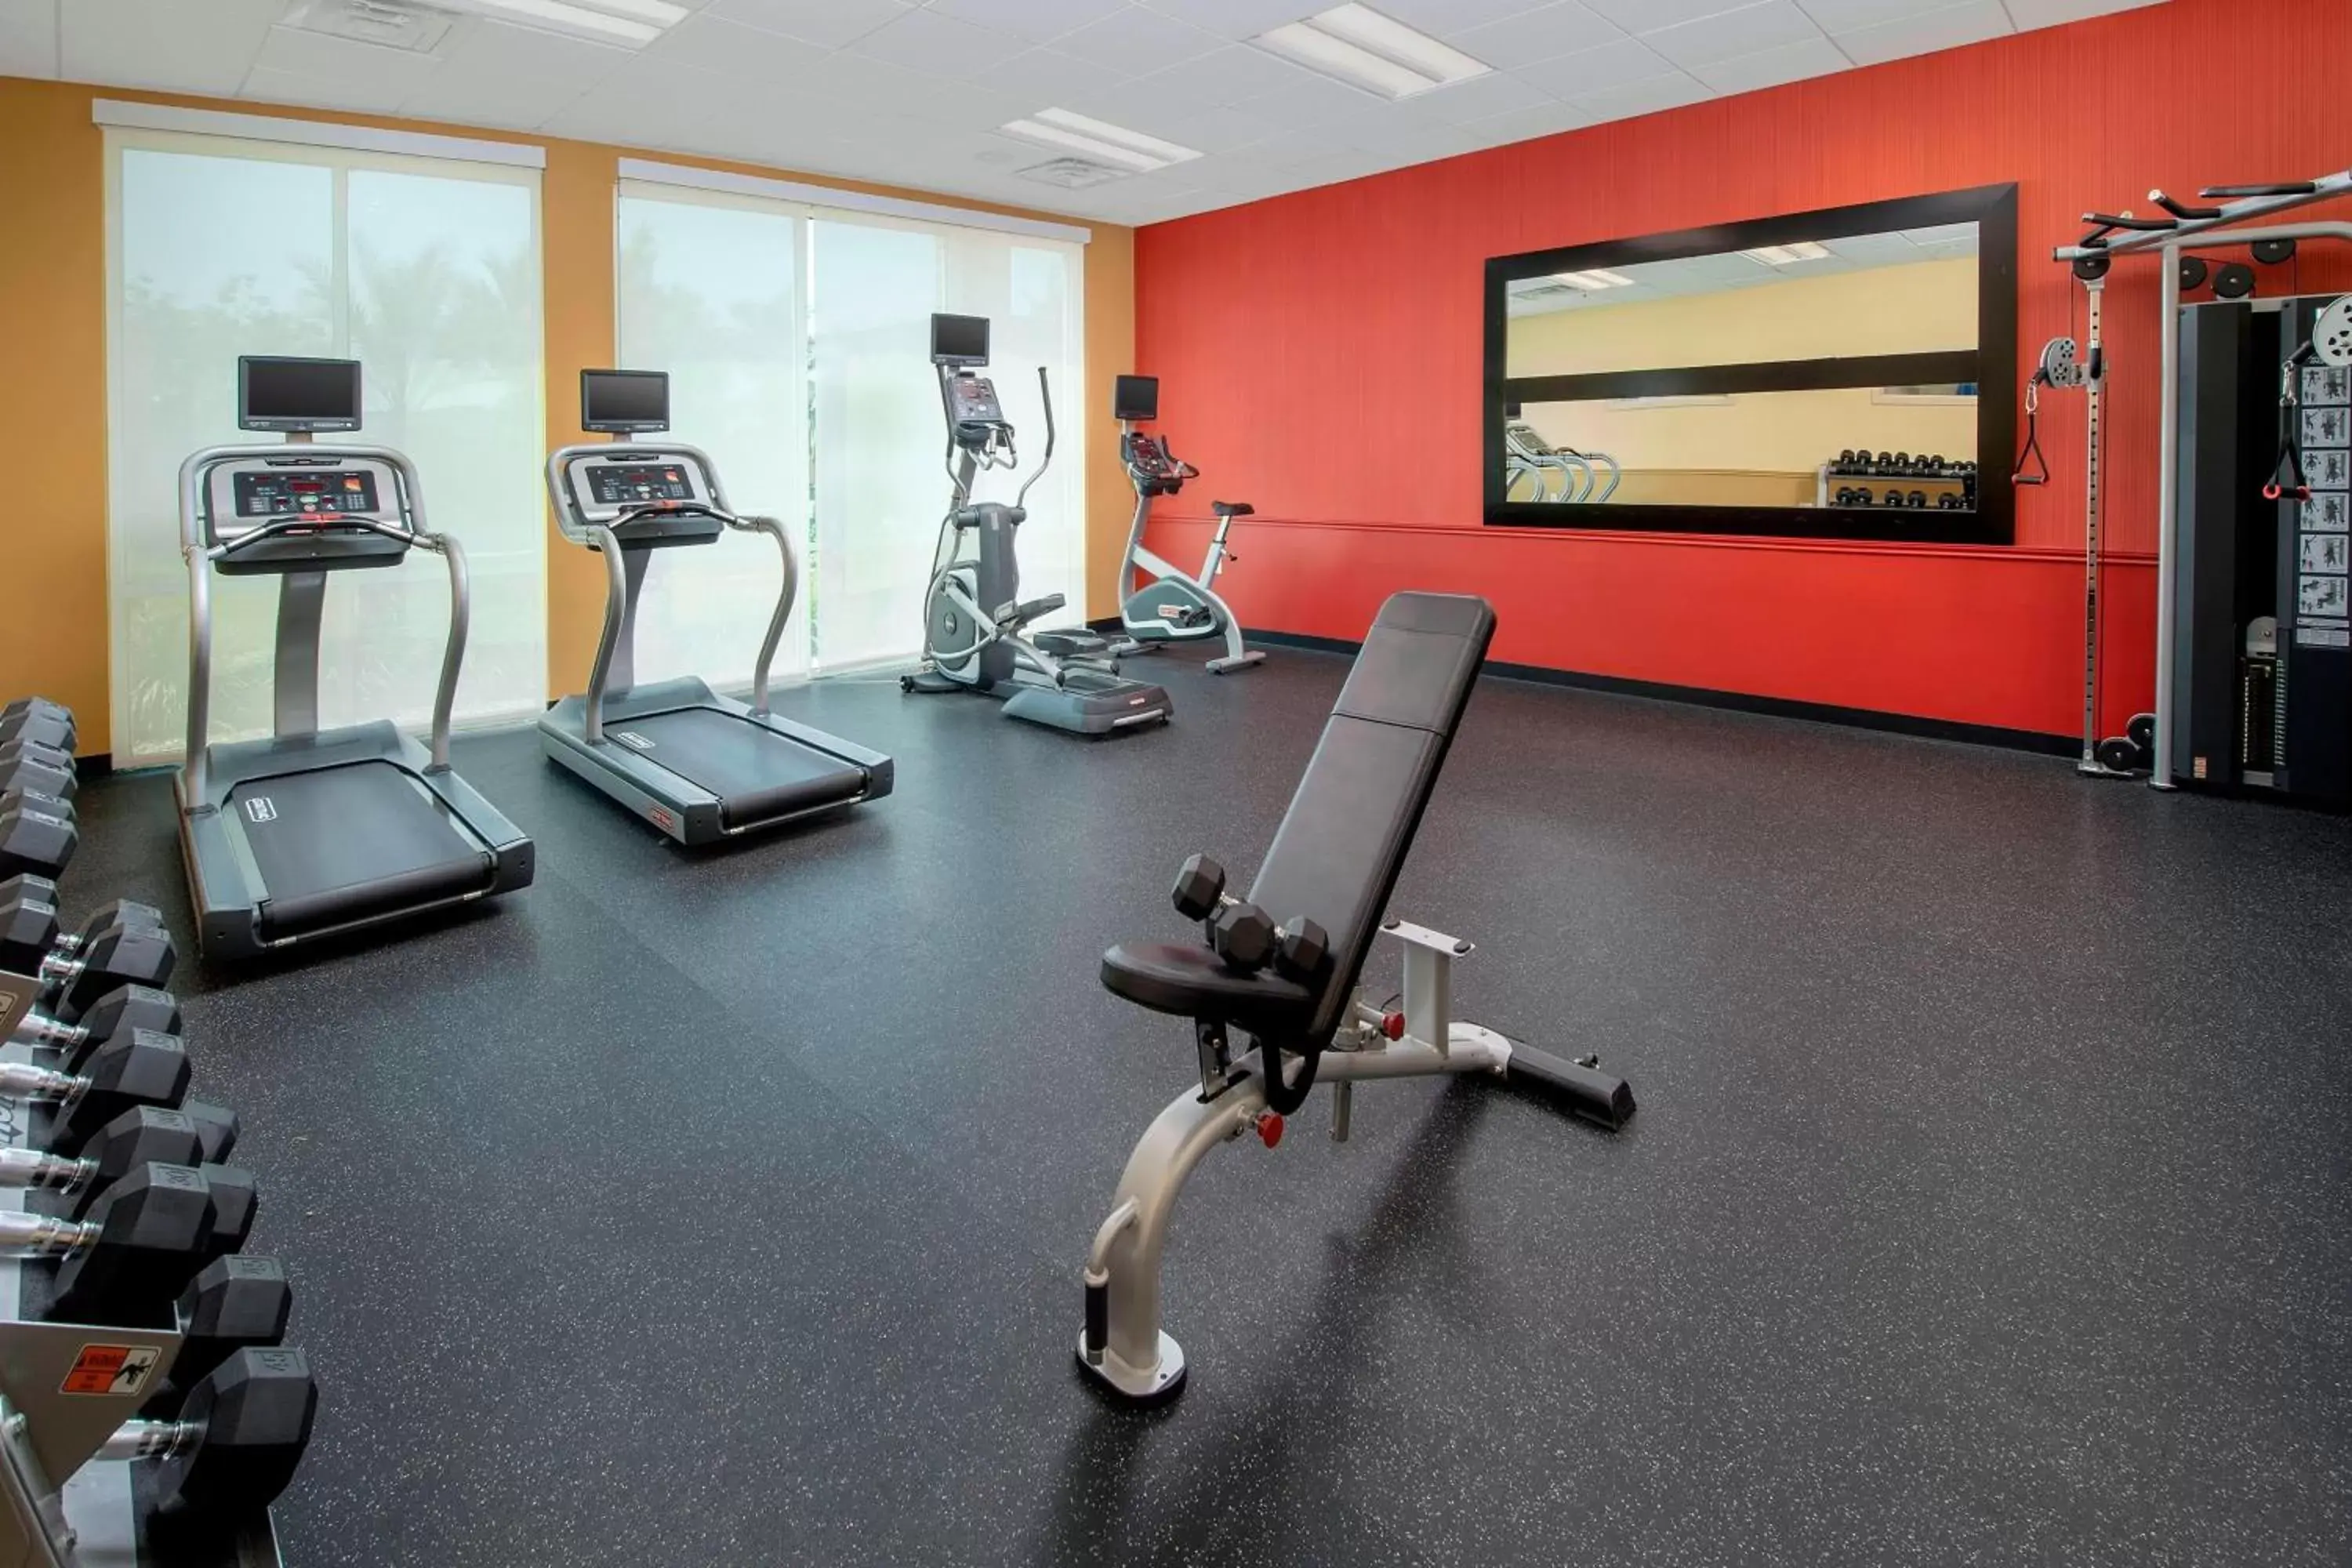 Fitness centre/facilities, Fitness Center/Facilities in Courtyard Houston NW/290 Corridor